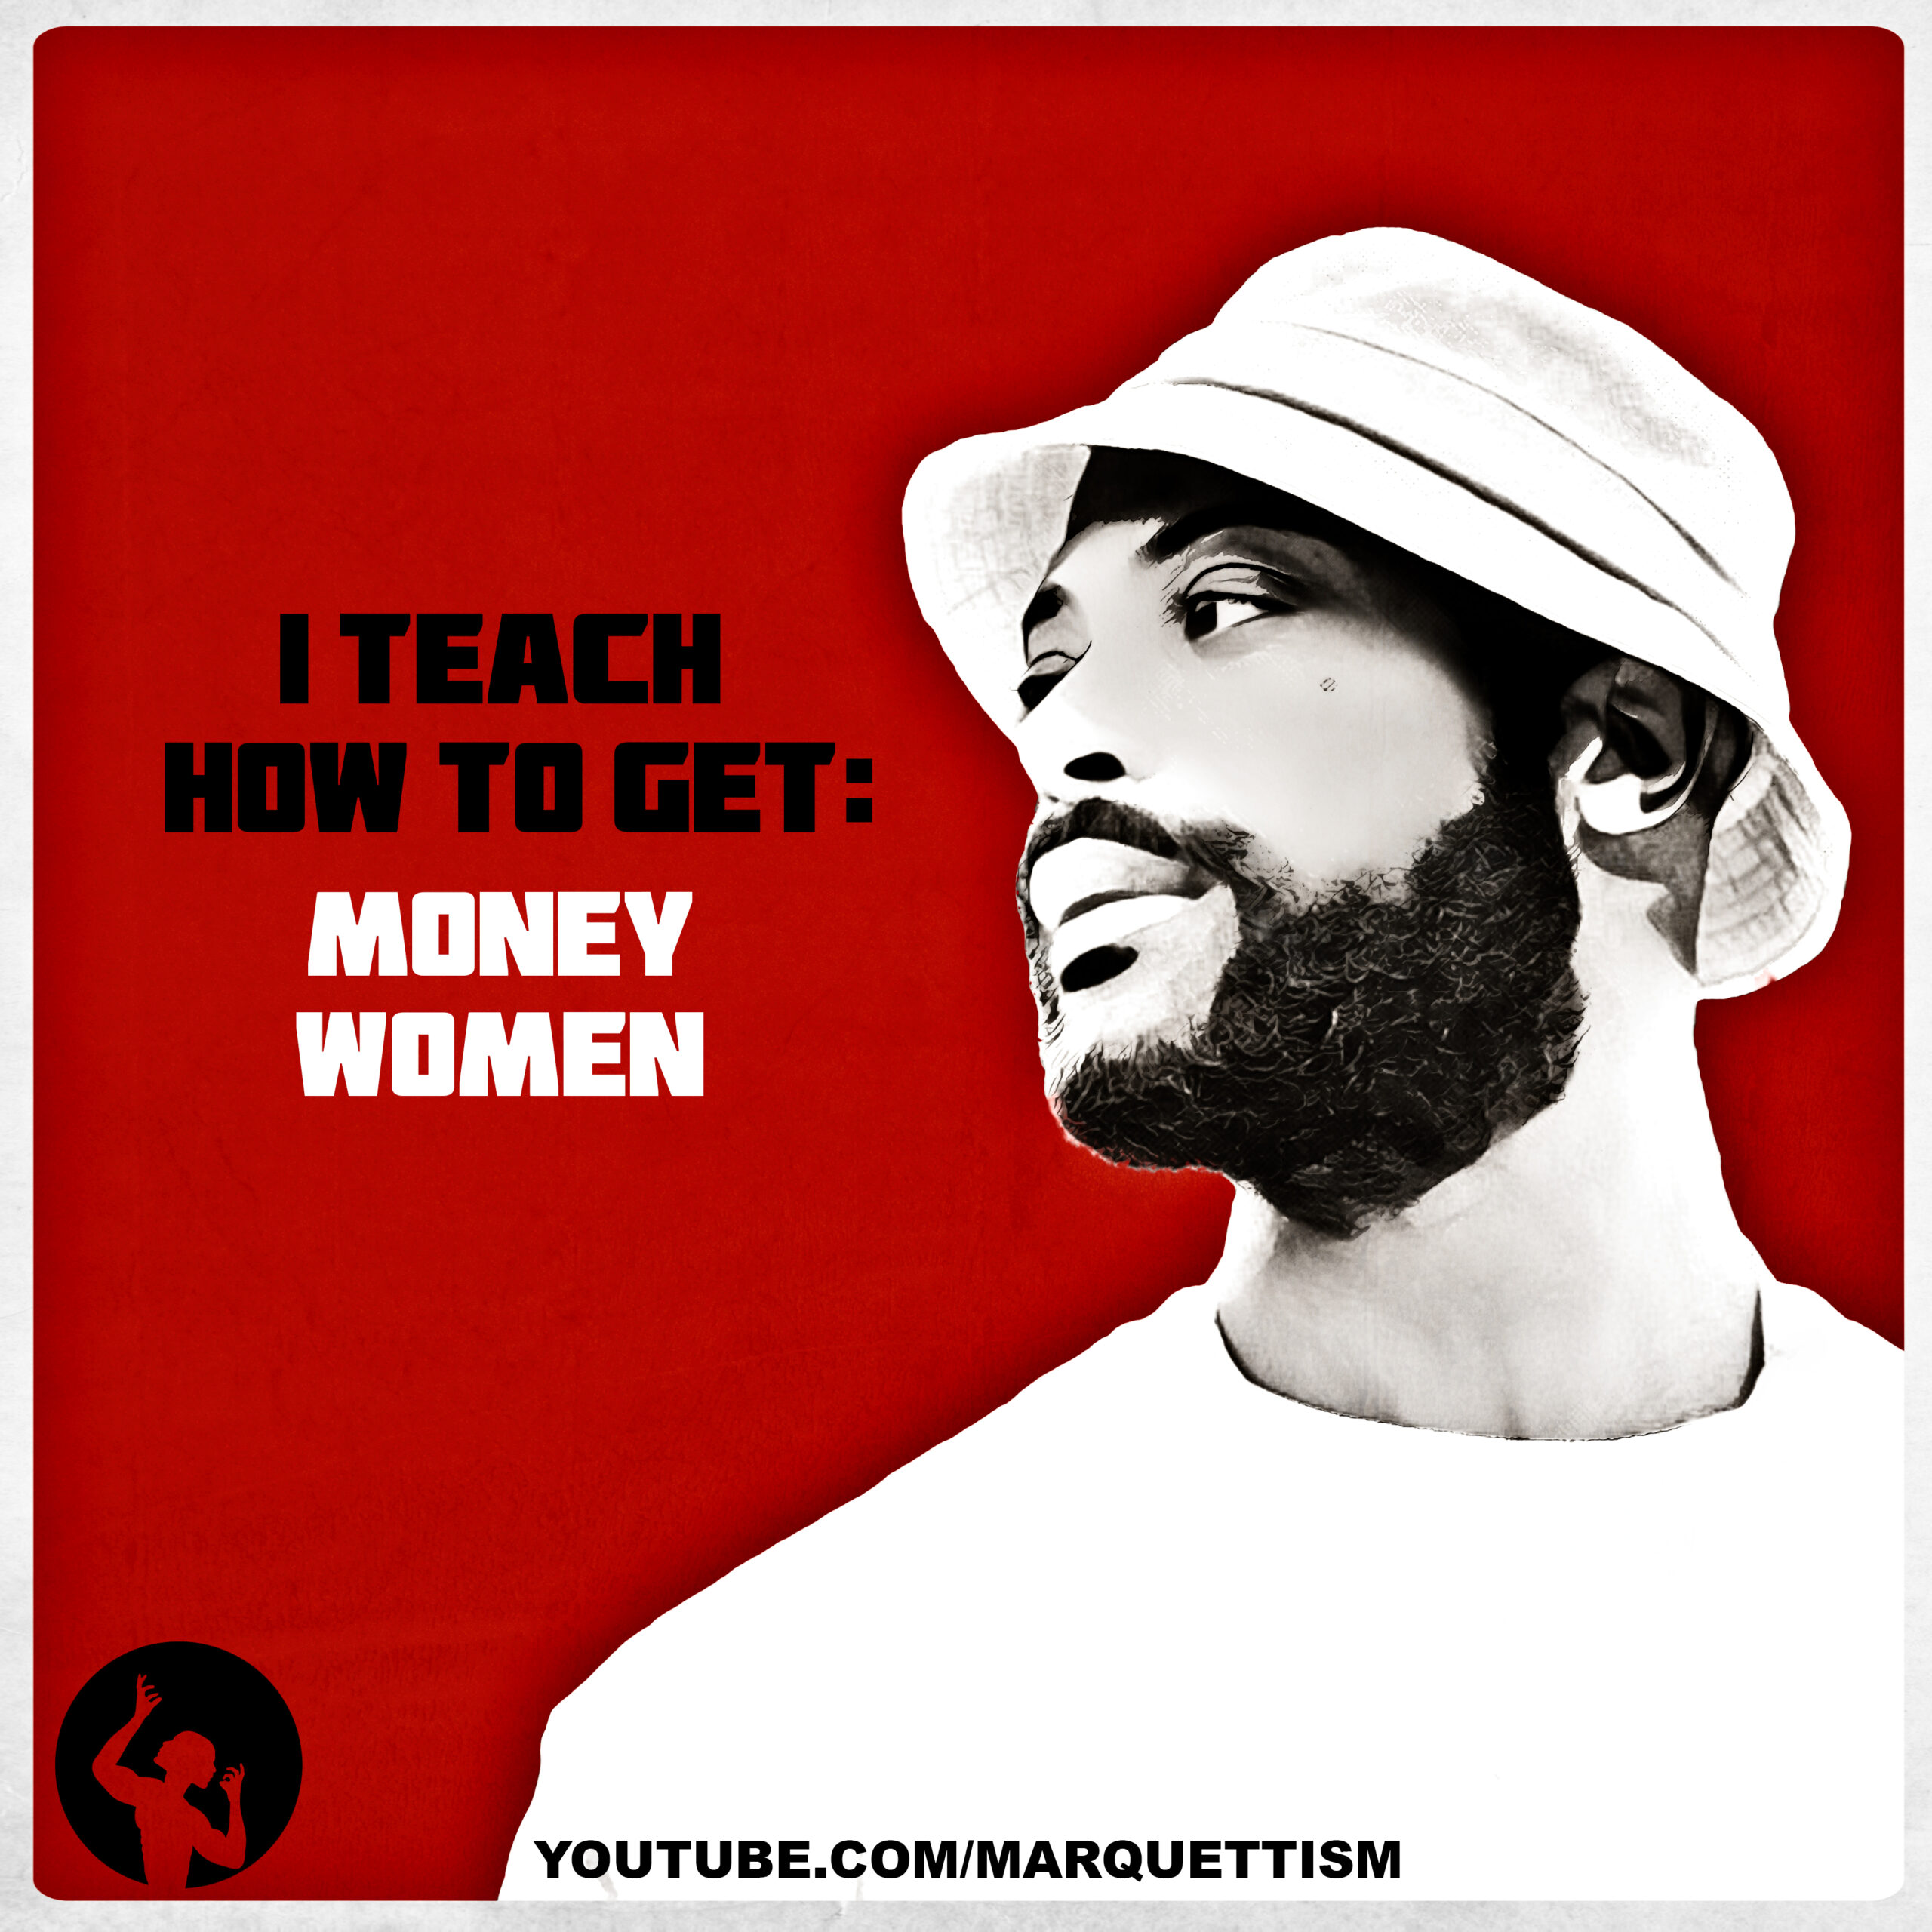 Live NOW! 30 Years of Prison – Lessons on Mindset from Banky Pound